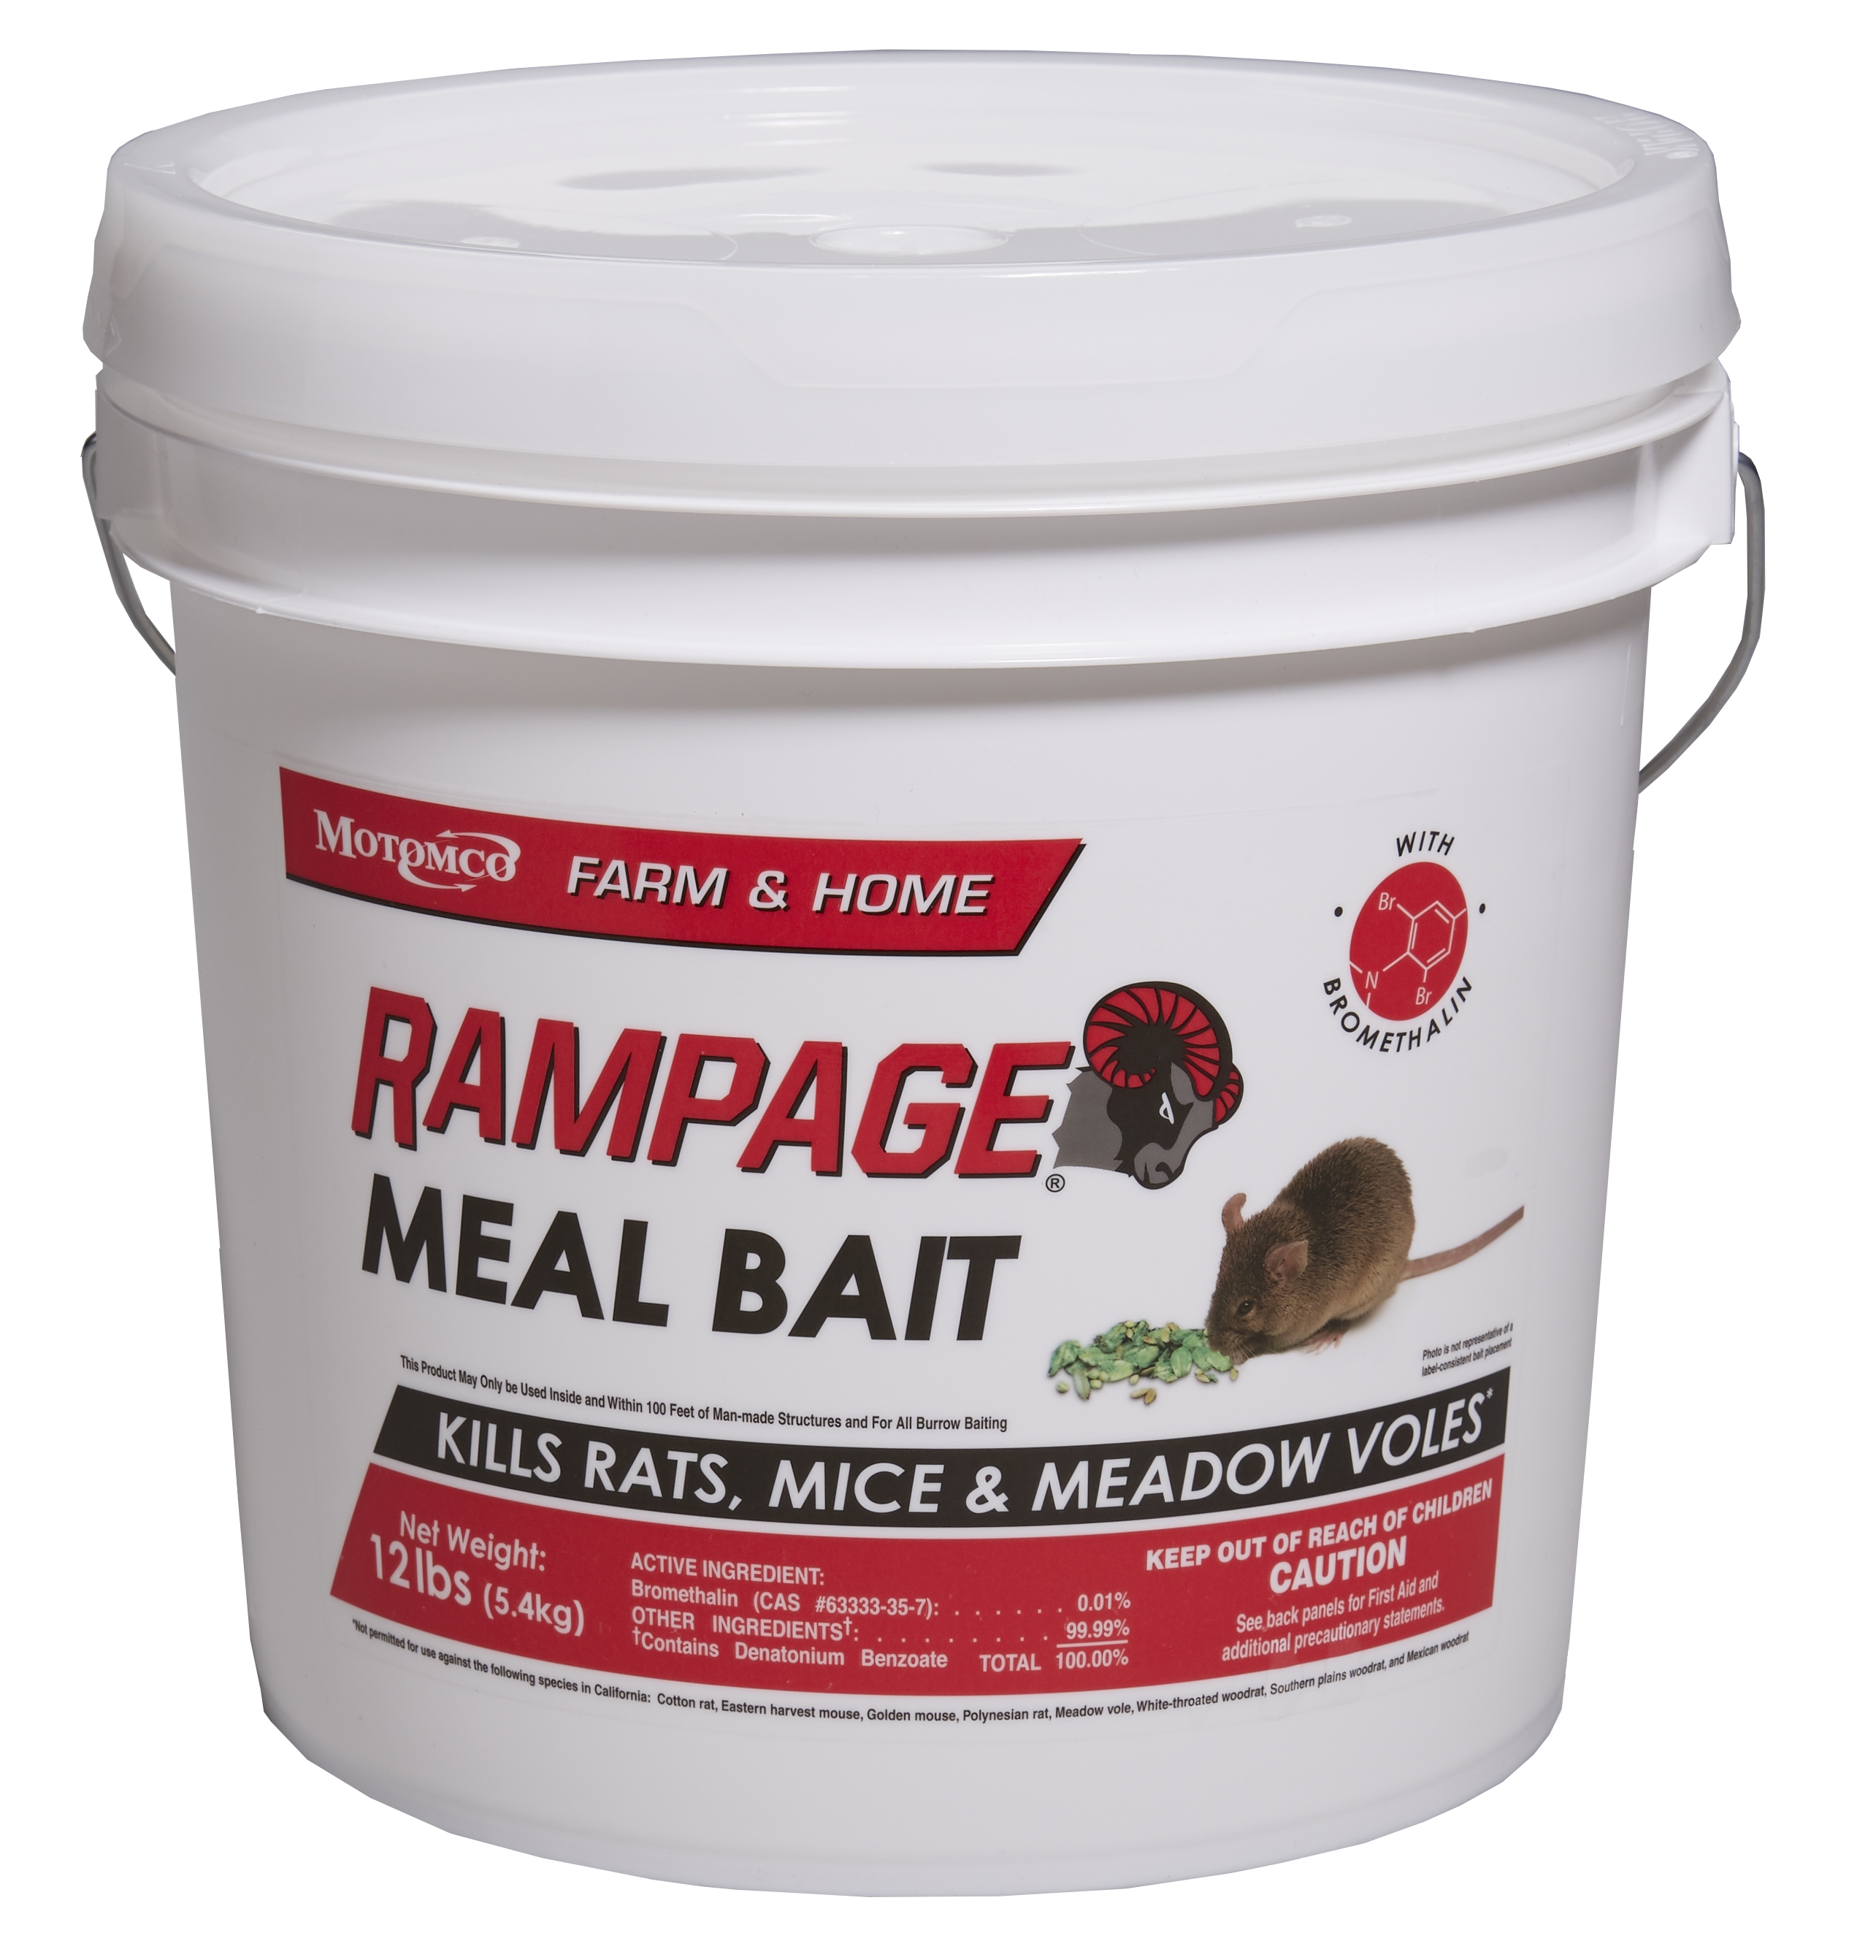 Rampage Meal Bait - Motomco